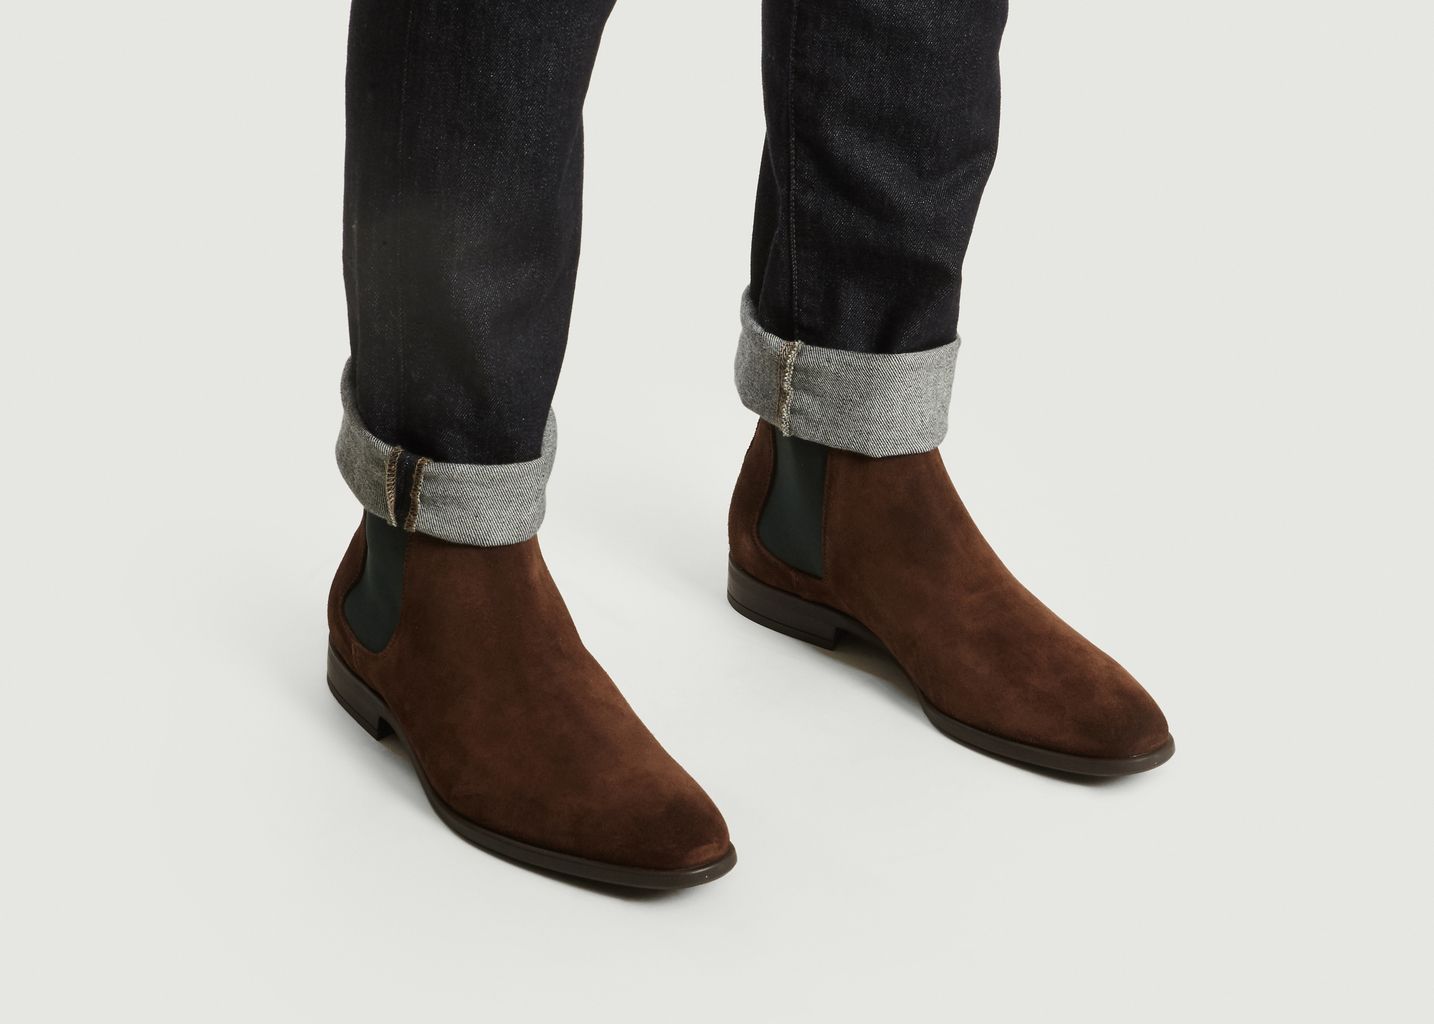 Ps Paul Smith Boots Flash Sales, 56% OFF | www.simbolics.cat